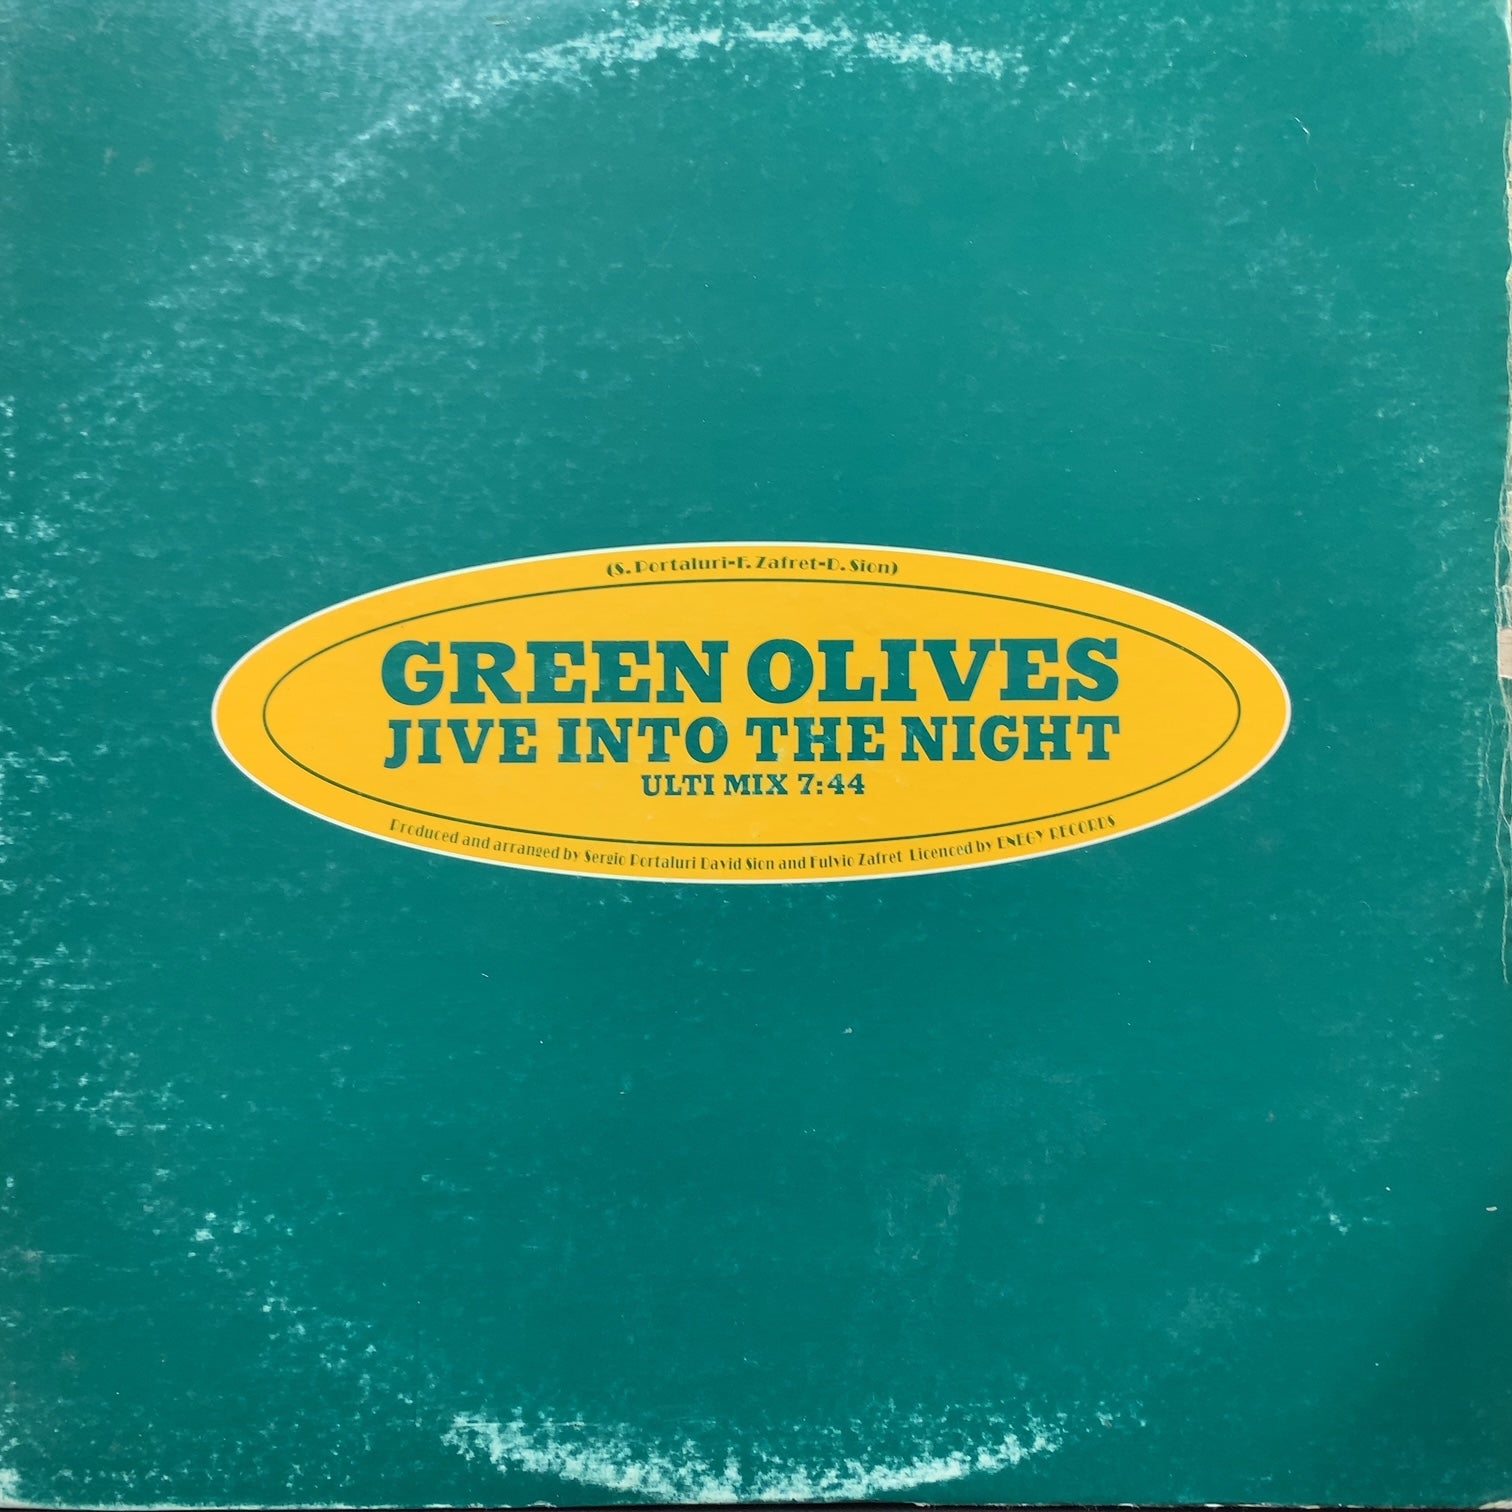 JIVE INTO THE NIGHT(ULTI MIX)/GREEN OLIVES - レコード